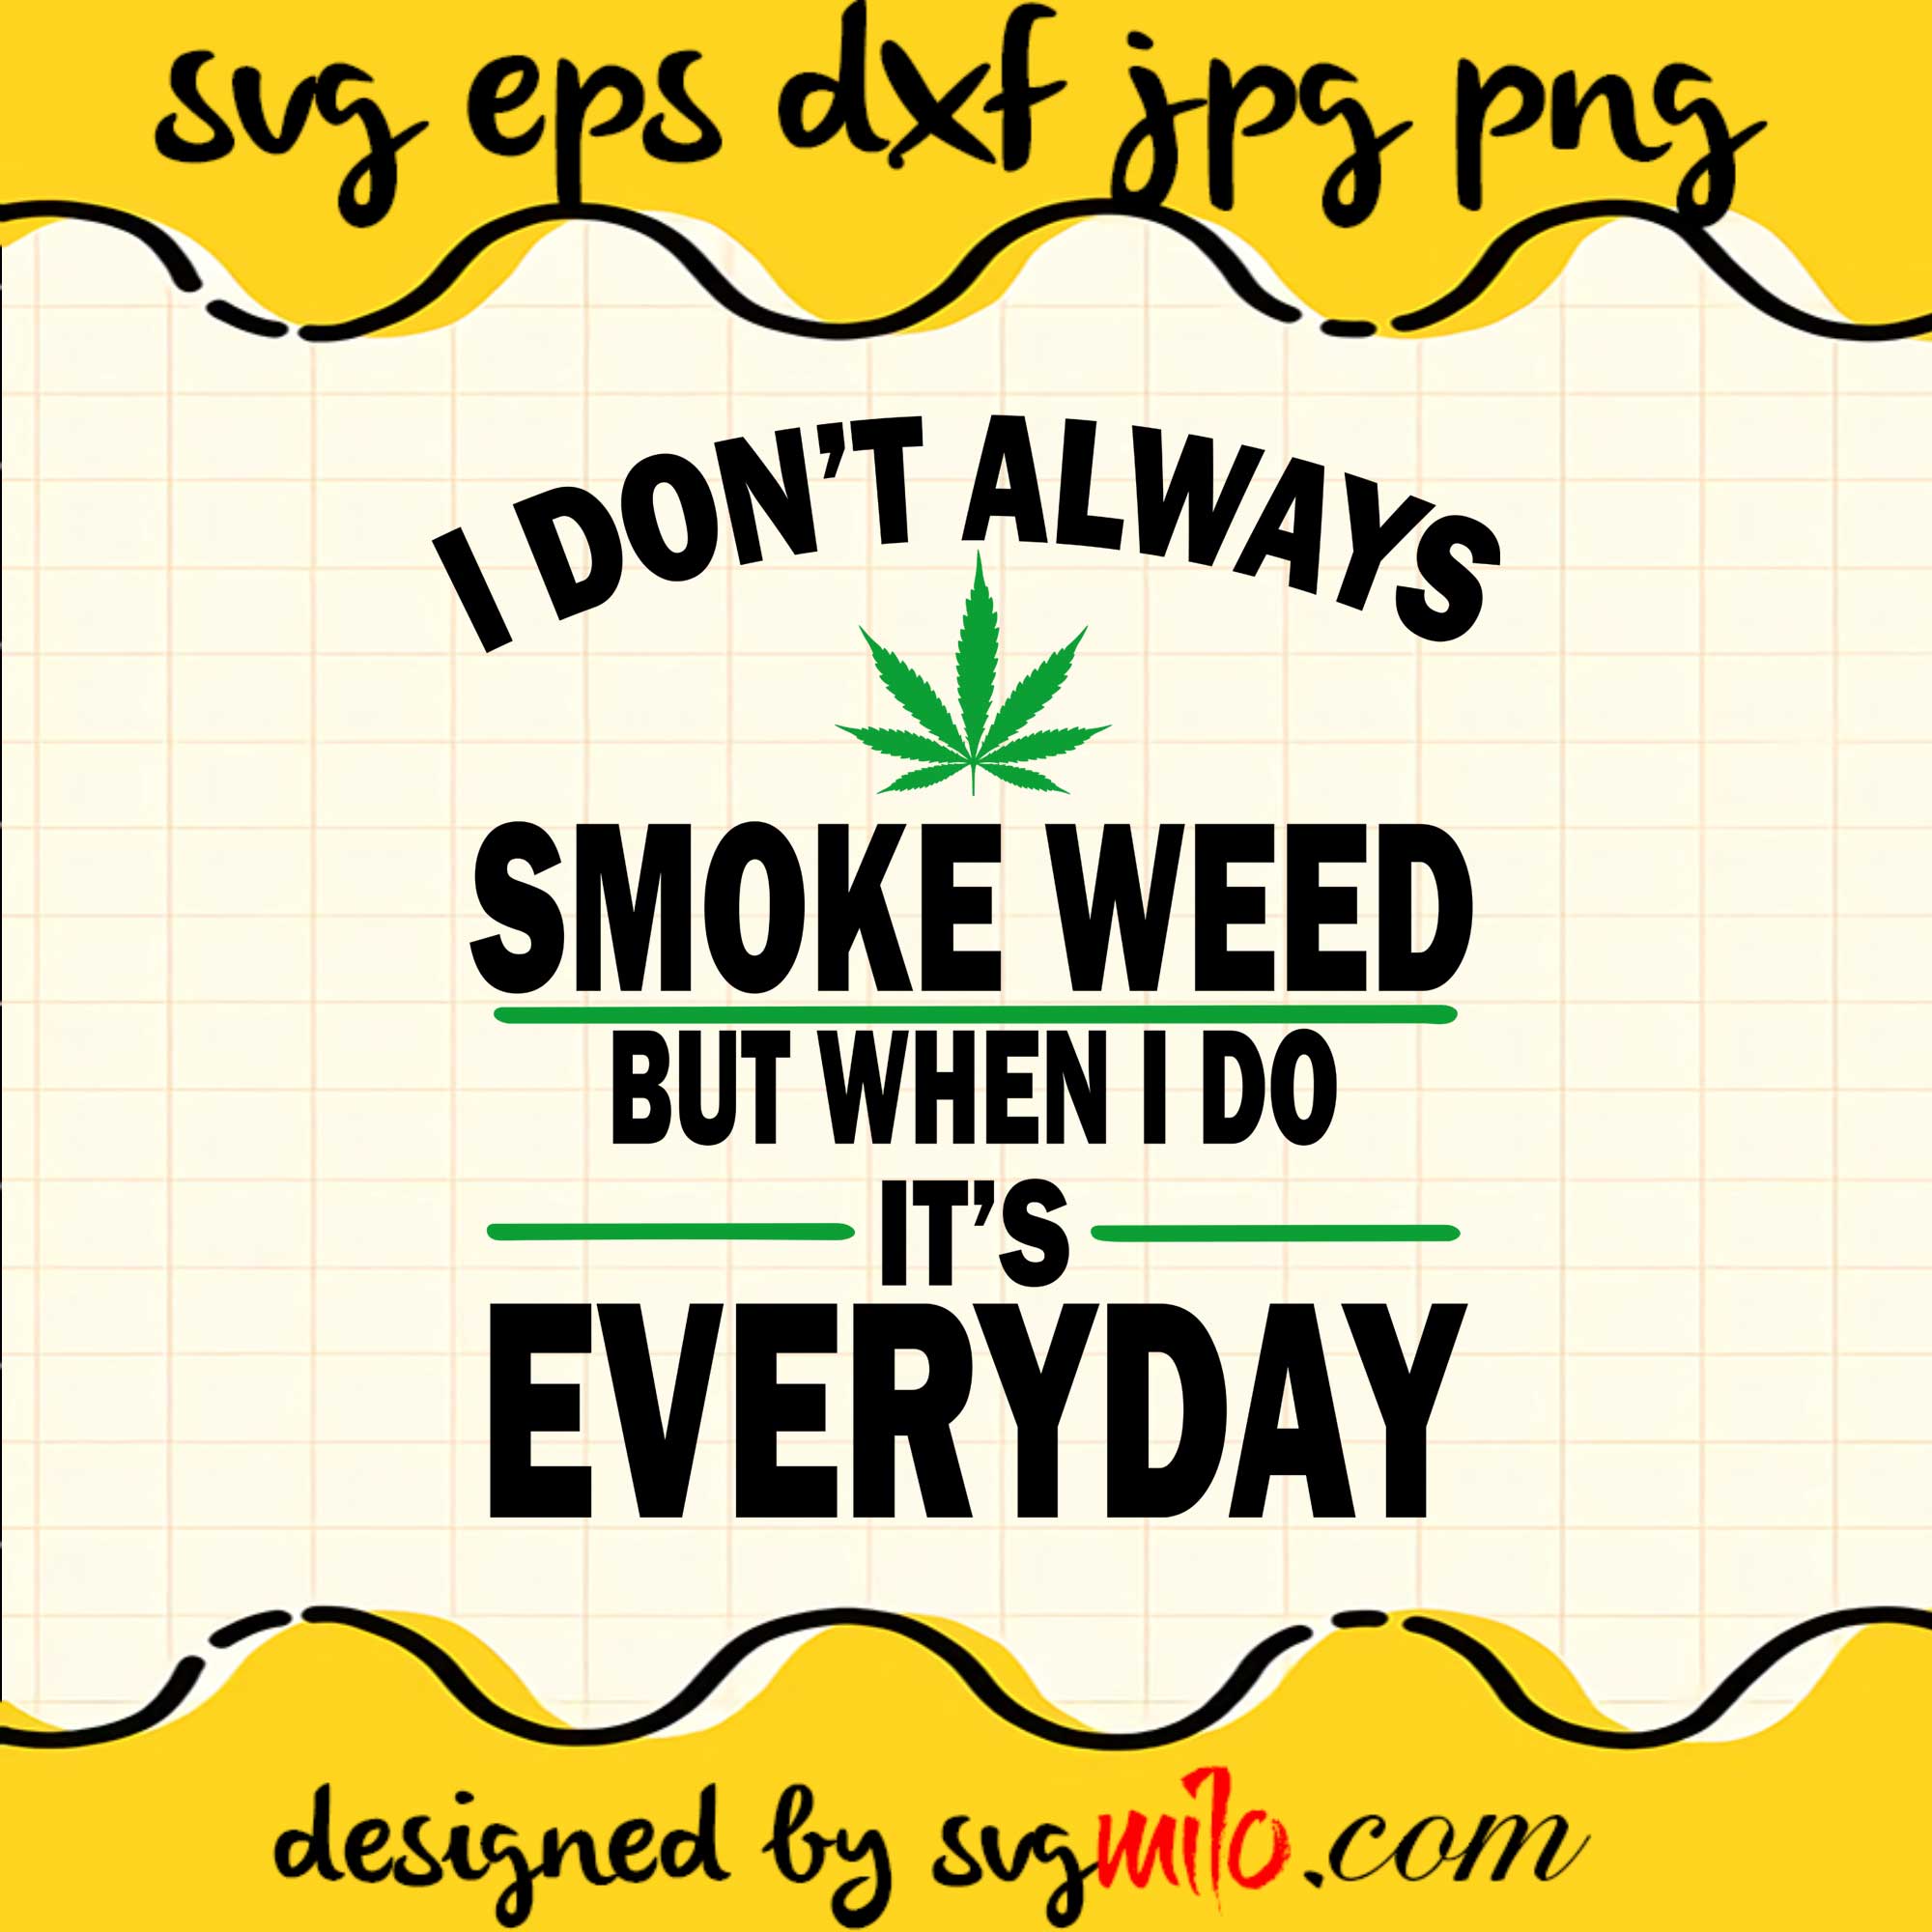 I Don't Always Smoke Weed But When I Do It's Everyday SVG PNG DXF EPS Cut Files For Cricut Silhouette,Premium quality SVG - SVGMILO